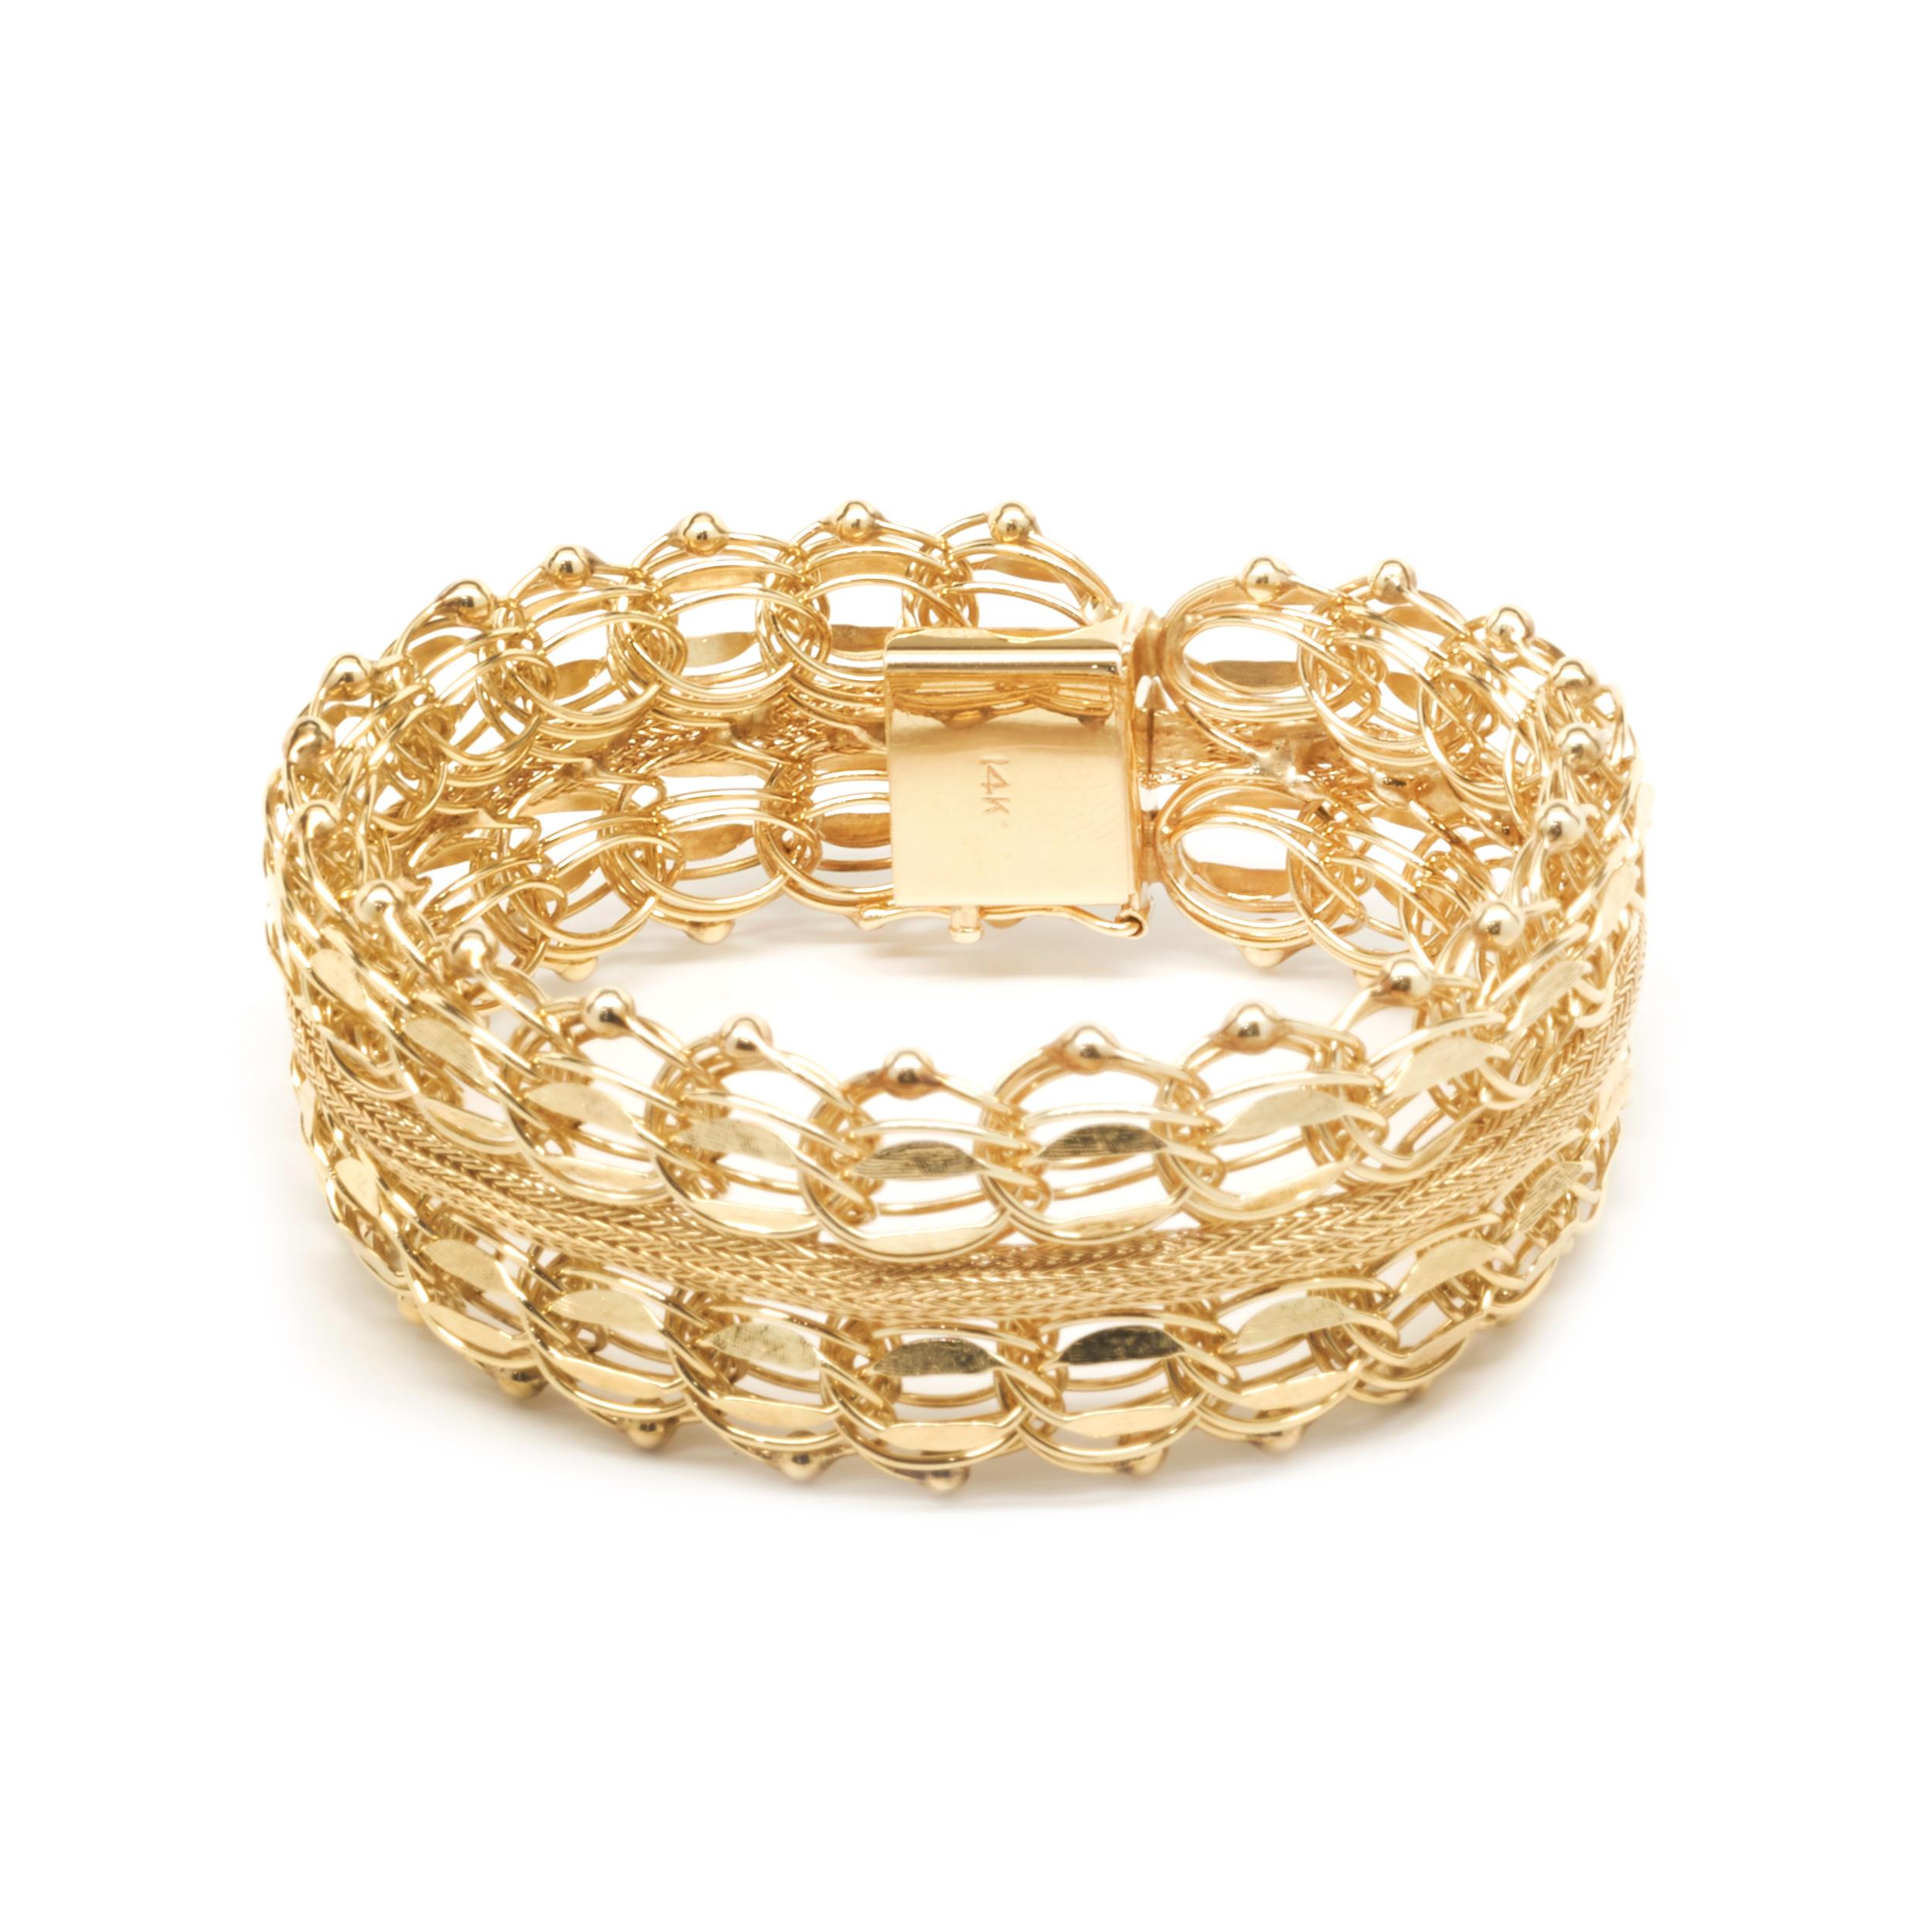 Designer: custom
Material: 14K yellow gold 
Dimensions: bracelet will fit up to a 7-inch wrist
Weight: 38.82 grams
